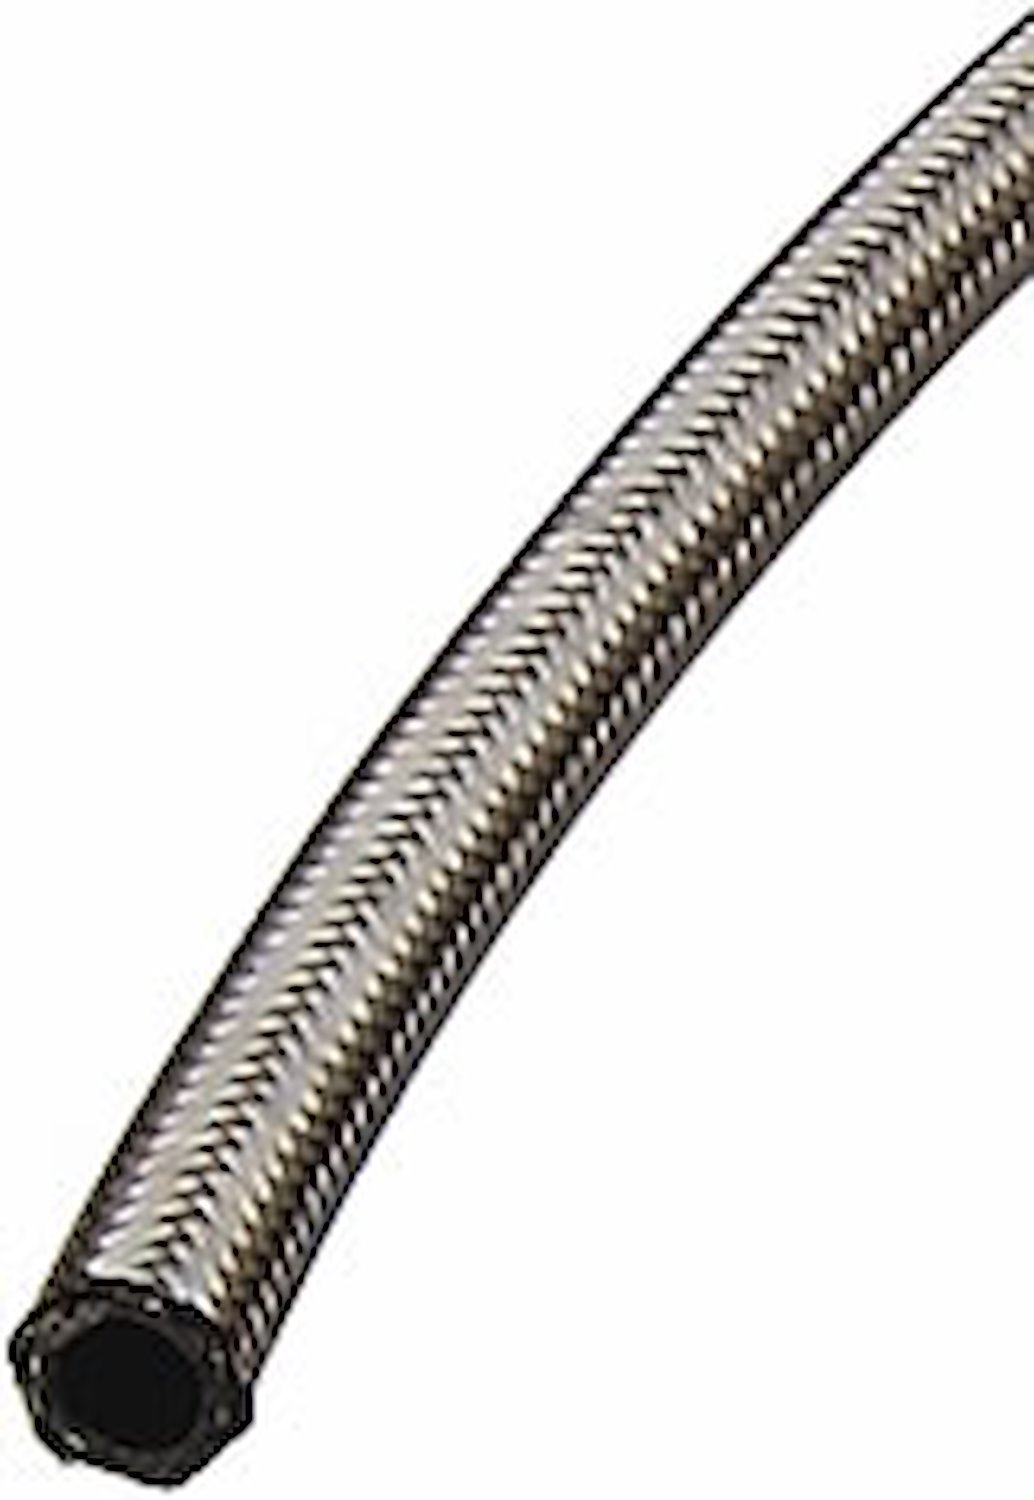 Pro-Flo 200 Series Stainless Steel Braided Hose -08